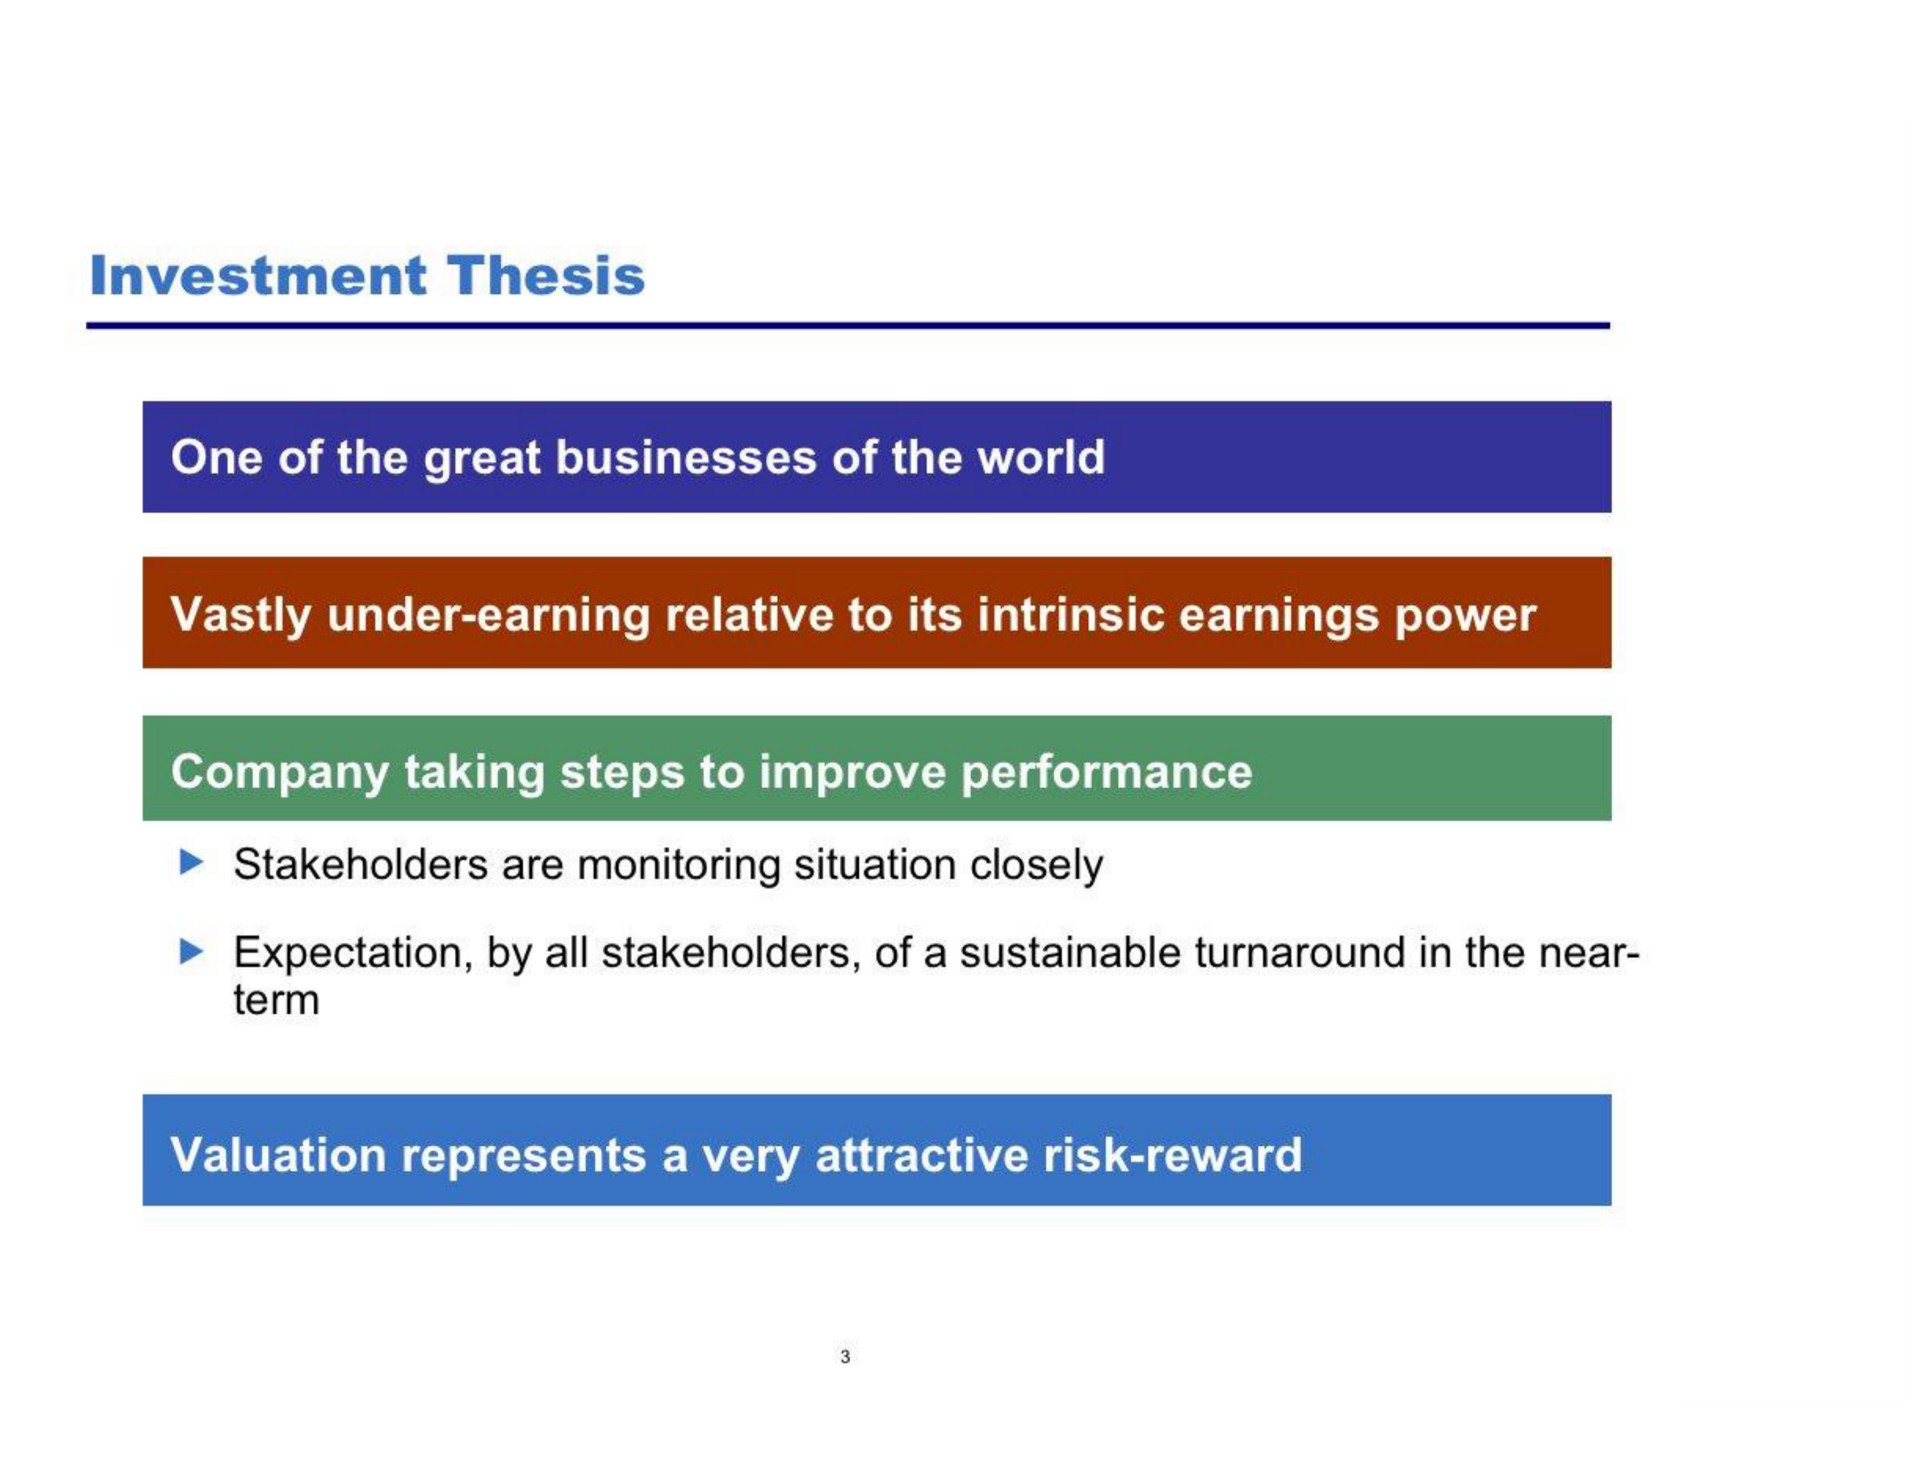 investment thesis one of the great businesses of the world vastly under earning relative to its intrinsic earnings power company taking steps to improve performance valuation represents a very attractive risk reward | Pershing Square